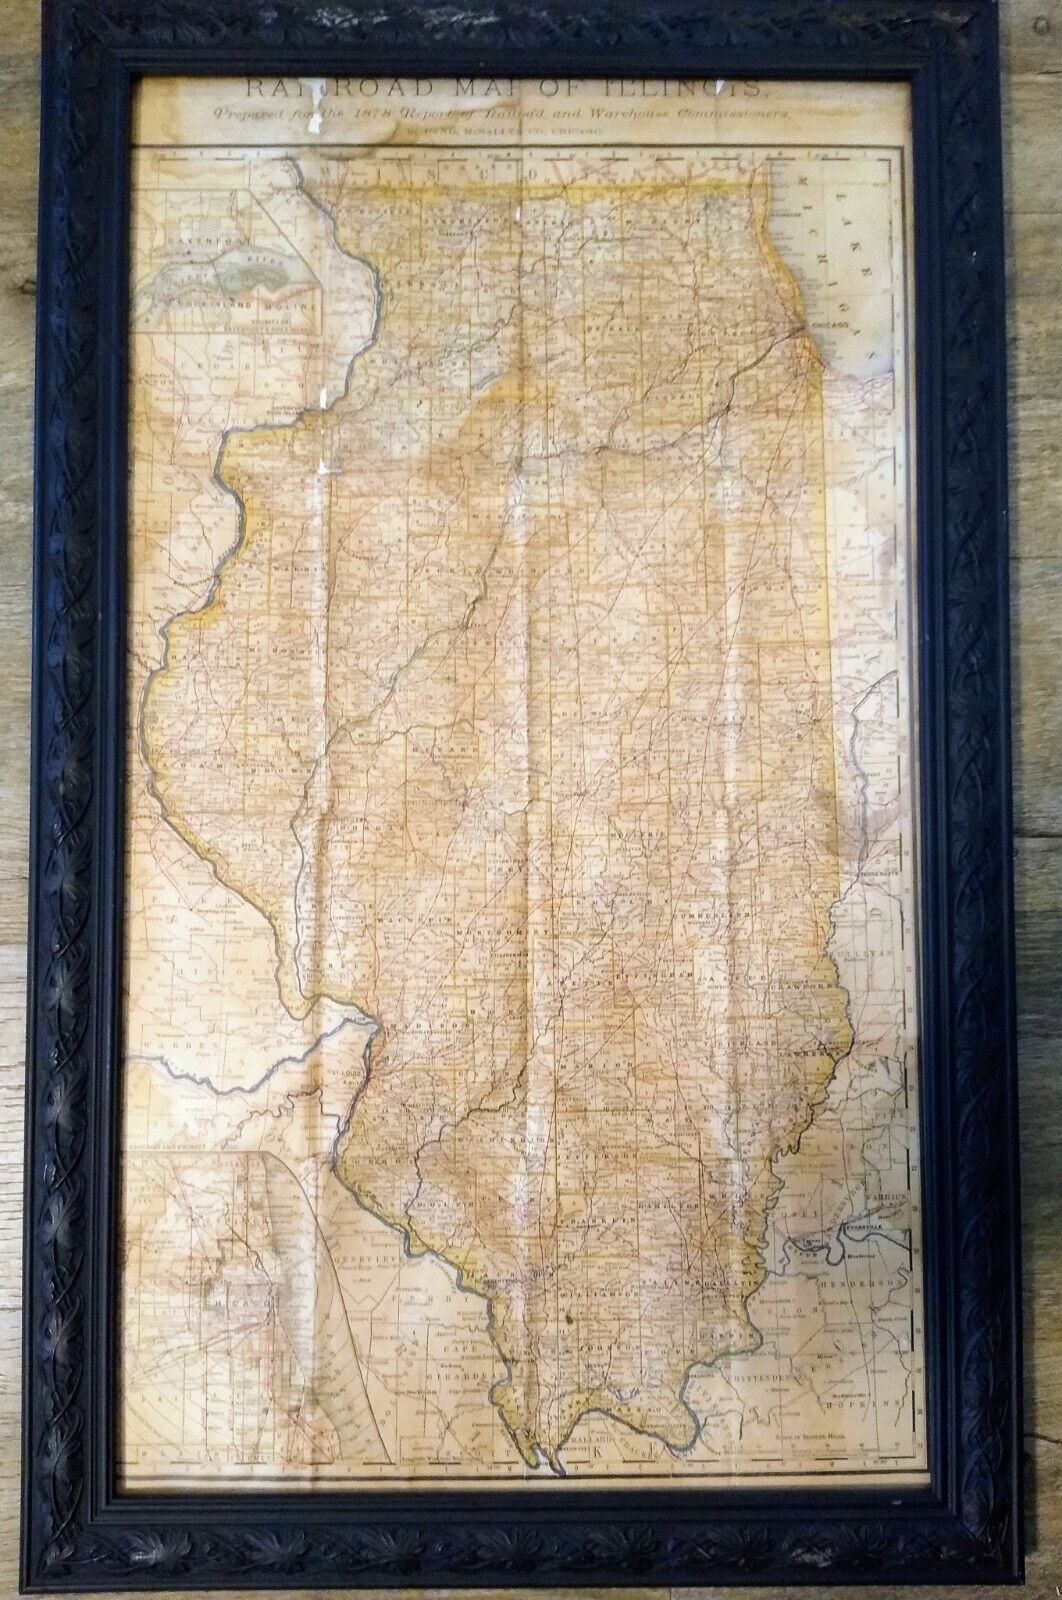 1878 Rand McNally 8th Annual Illinois Railroad & Warehouse Framed Fold Out Map